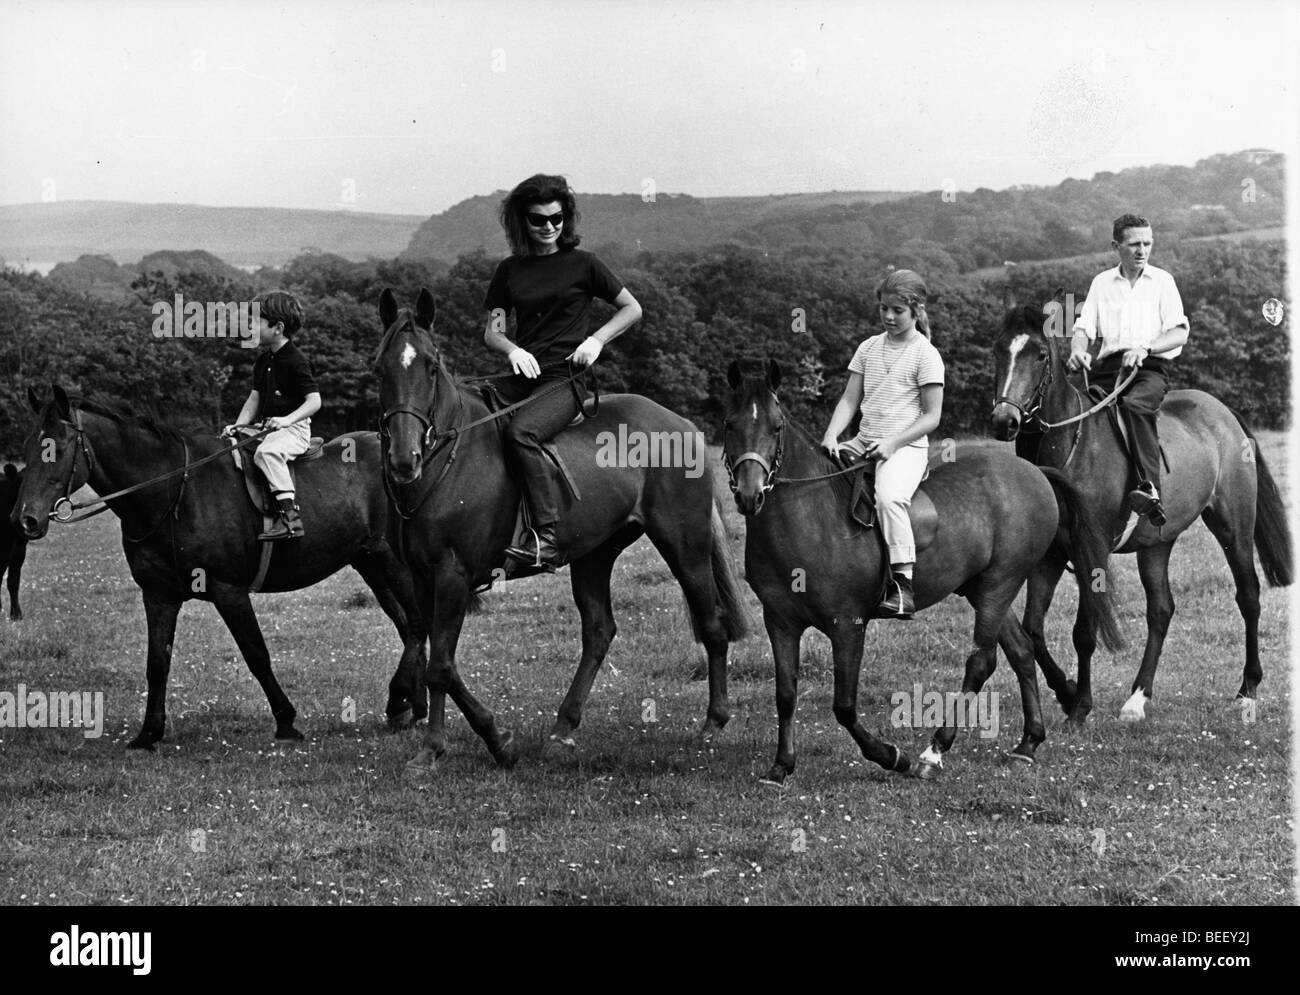 Jacqueline Kennedy riding in horses in the country with her children Stock Photo